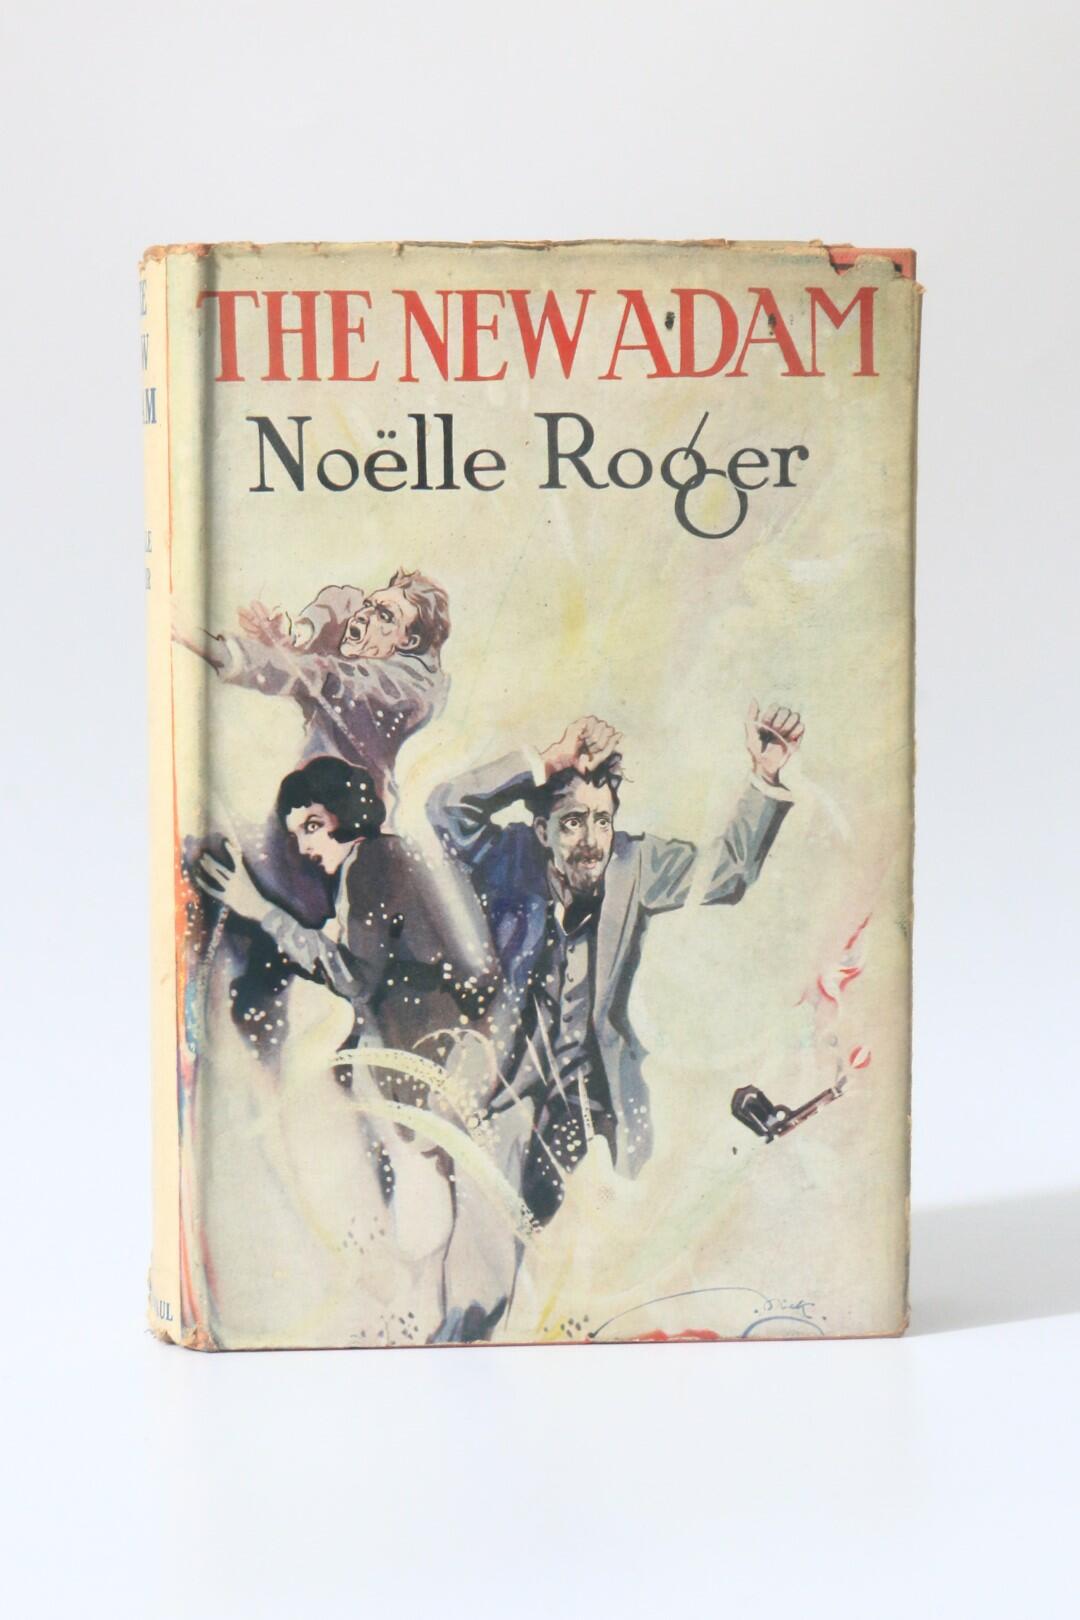 Noelle Roger - The New Adam - Stanley Paul, 1926, First Edition.